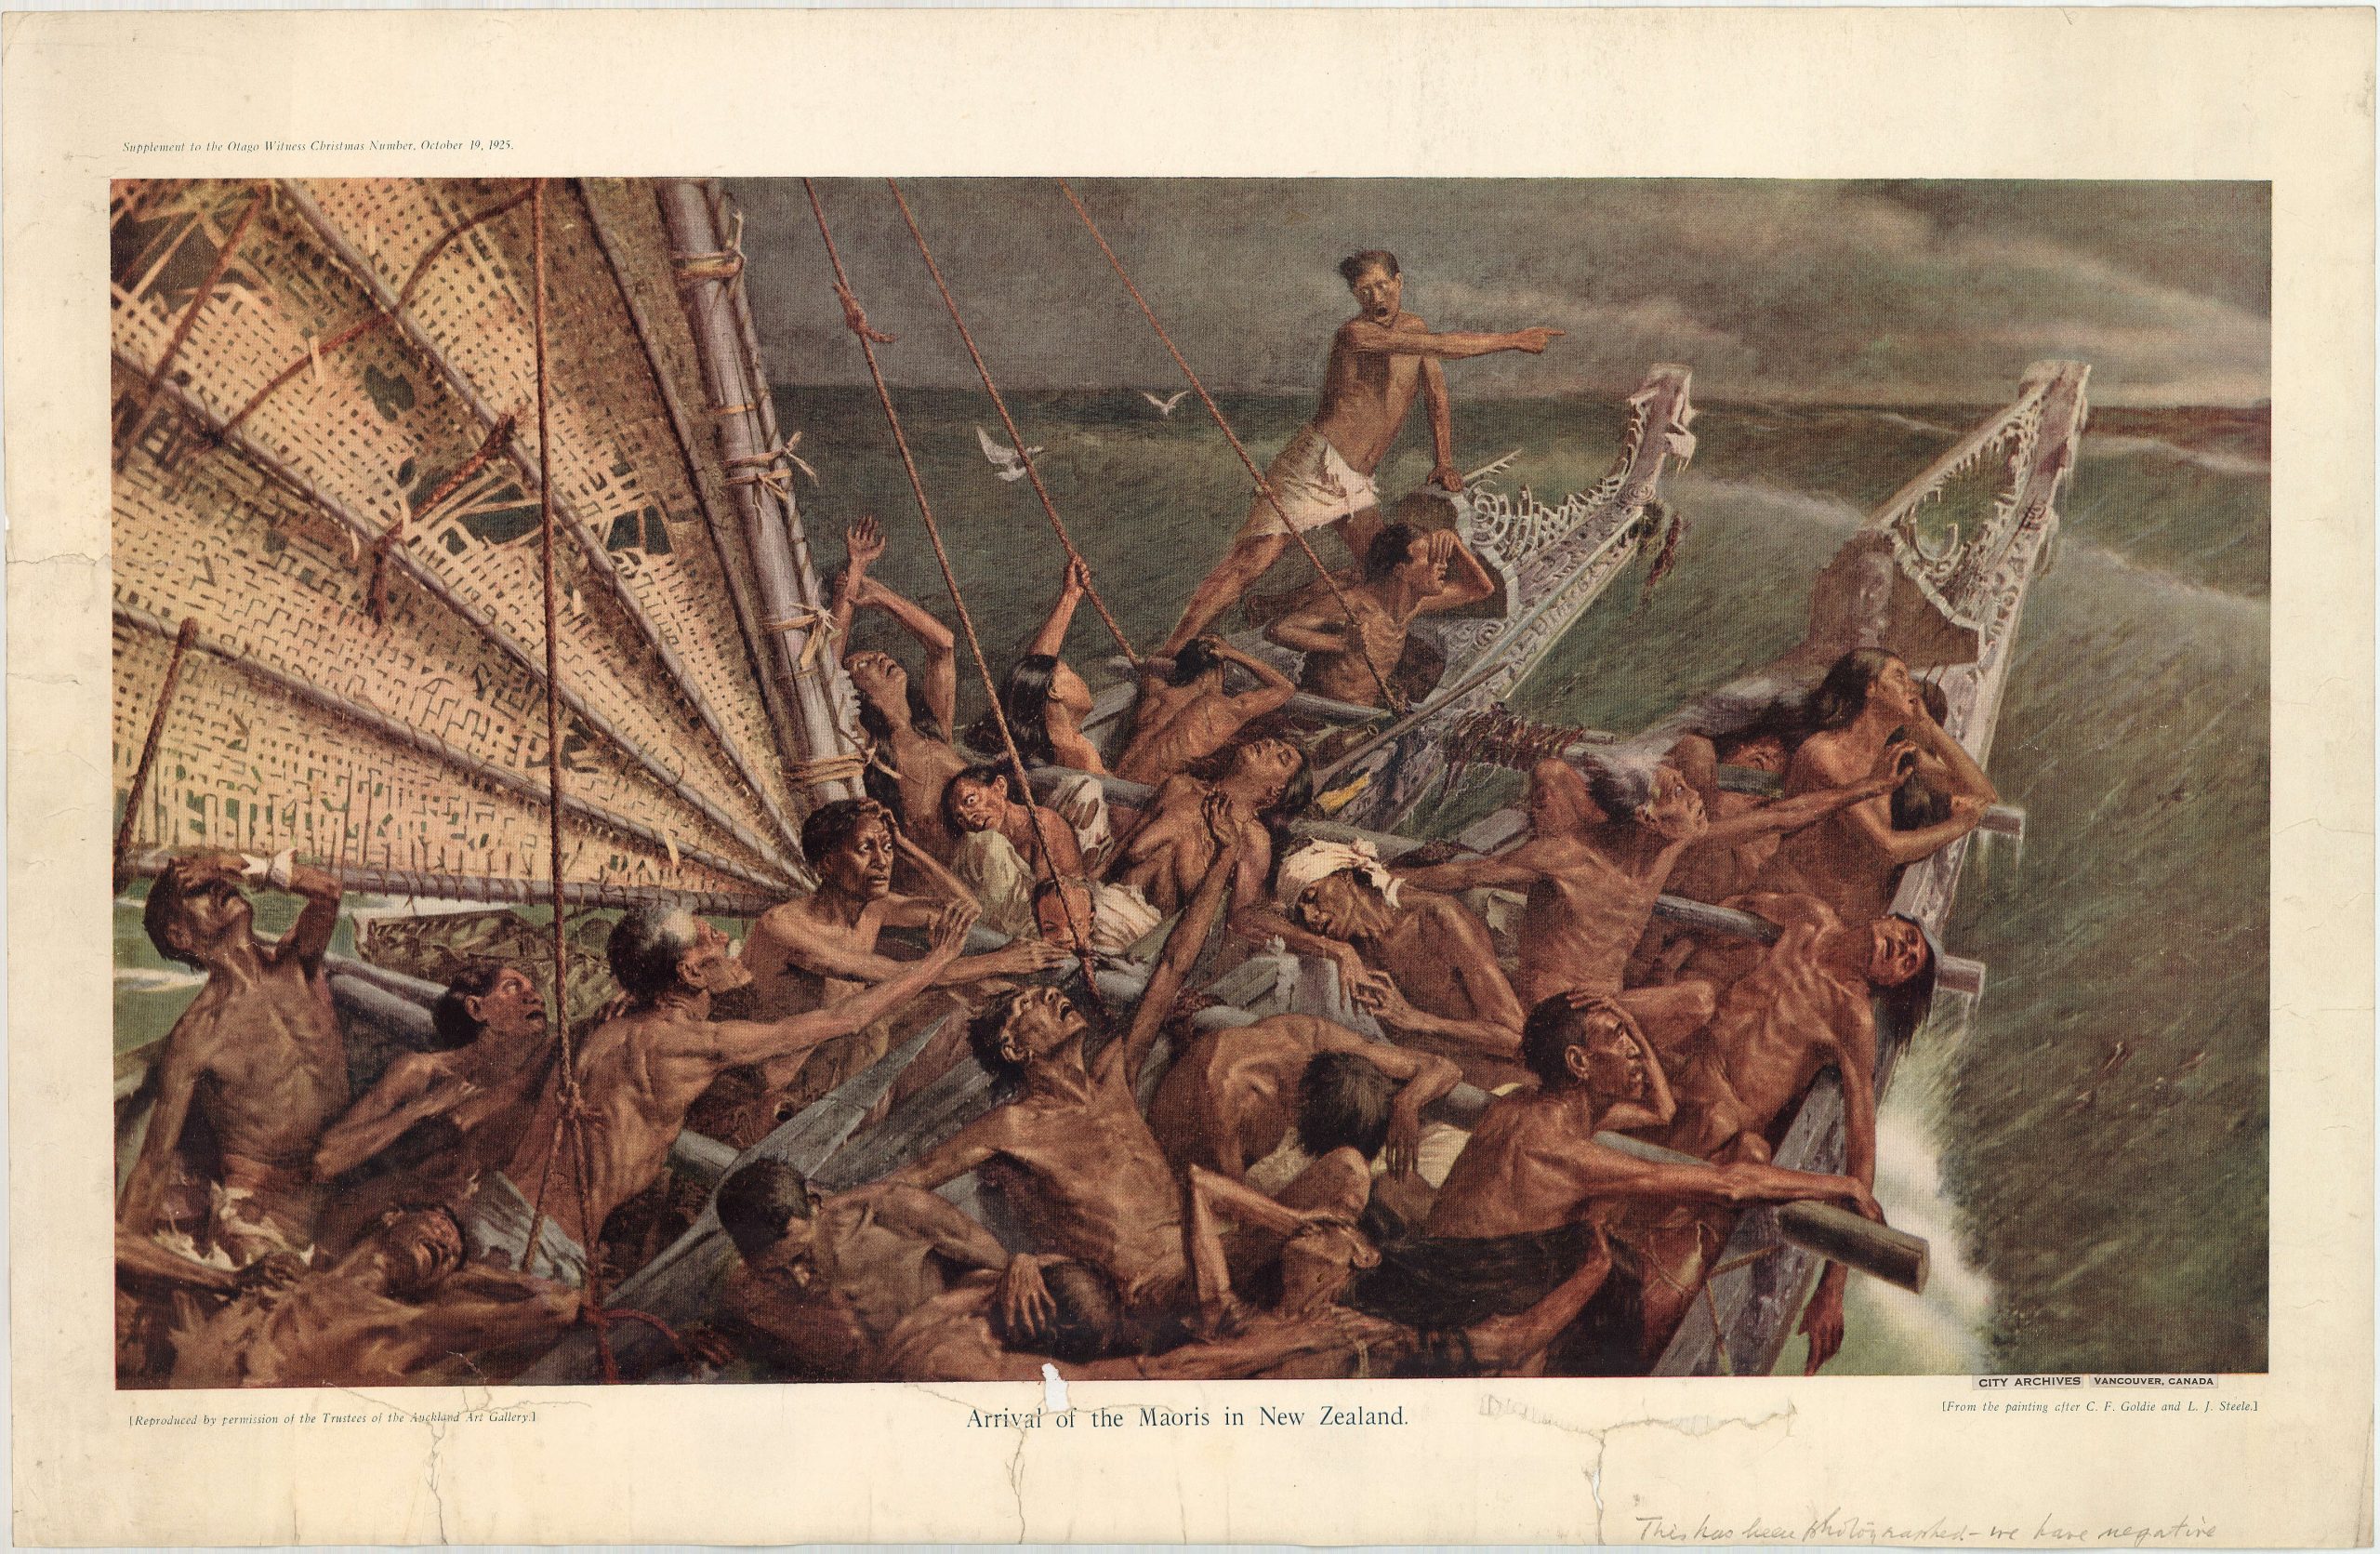 famous nineteenth-century image depicting the arrival of Maori in New Zealand